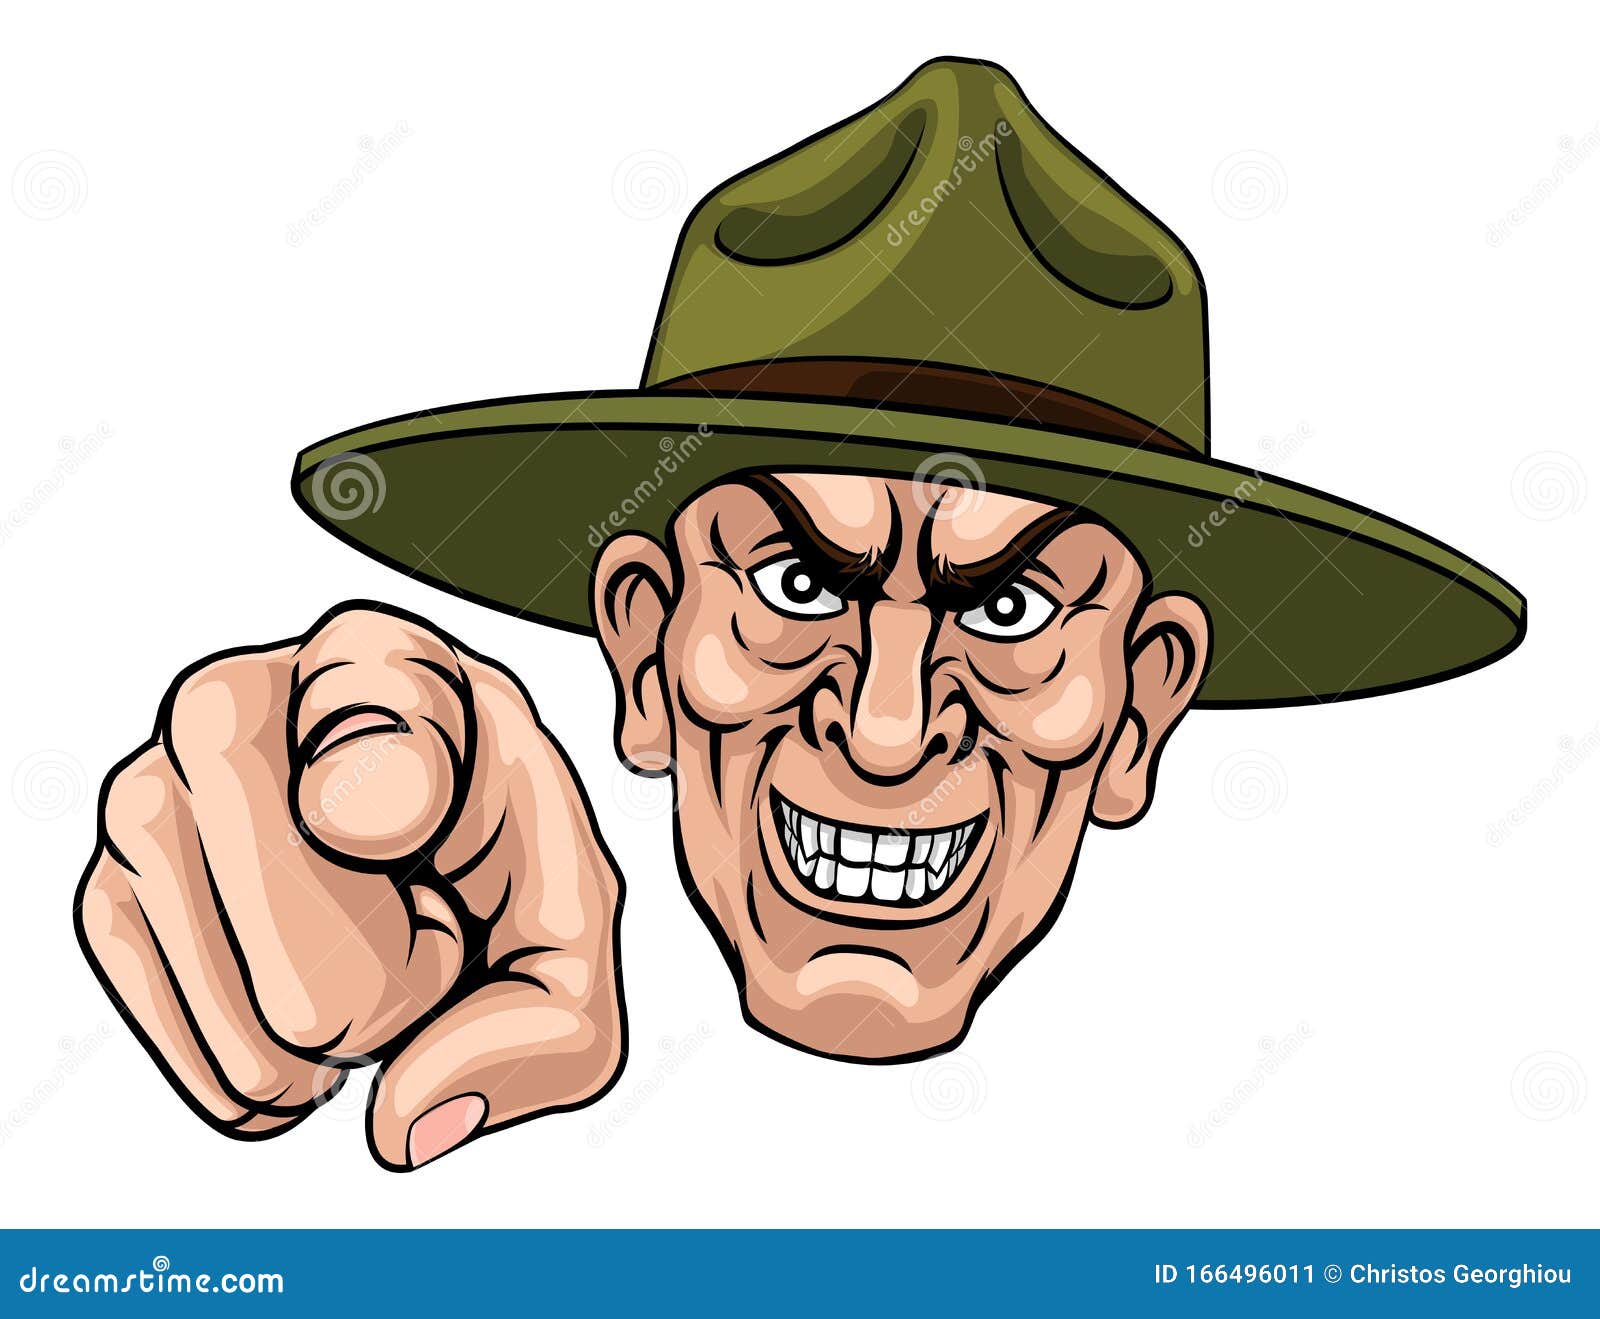 Army Bootcamp Drill Sergeant Soldier Ponting Stock Vector ...